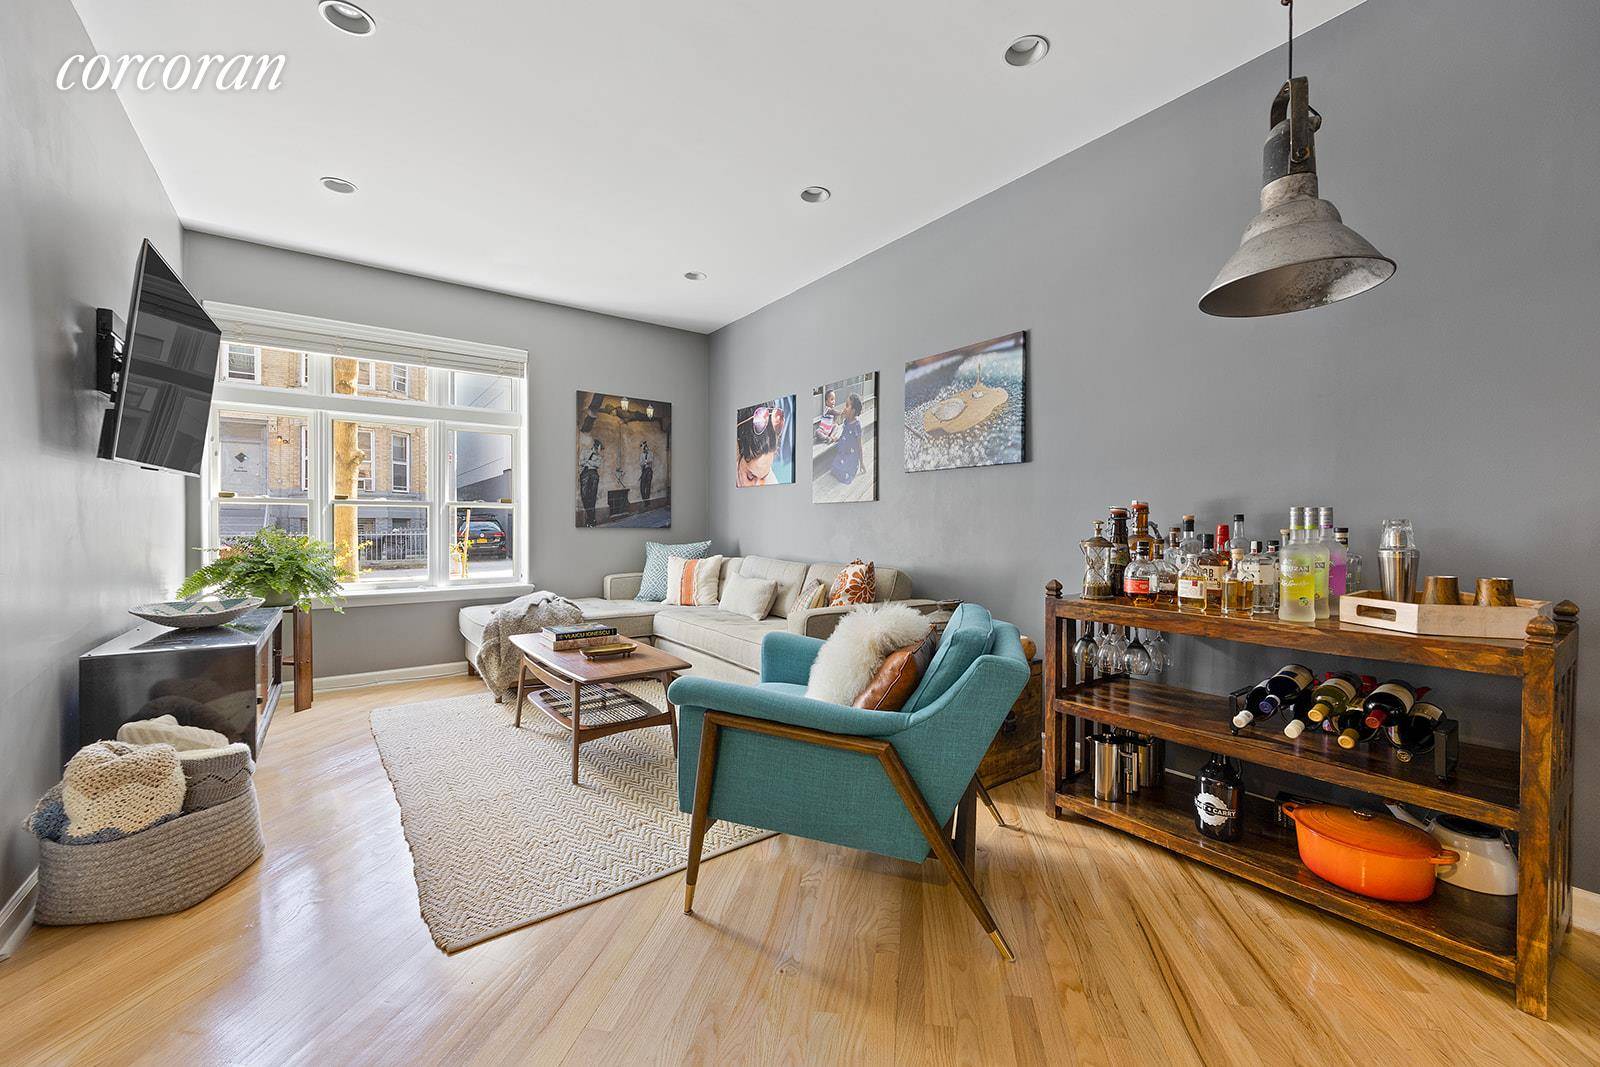 BESPOKE duplex condominium with TONS of storage is new to the market at 215 Parkville Avenue in Brooklyn's Kensington neighborhood.